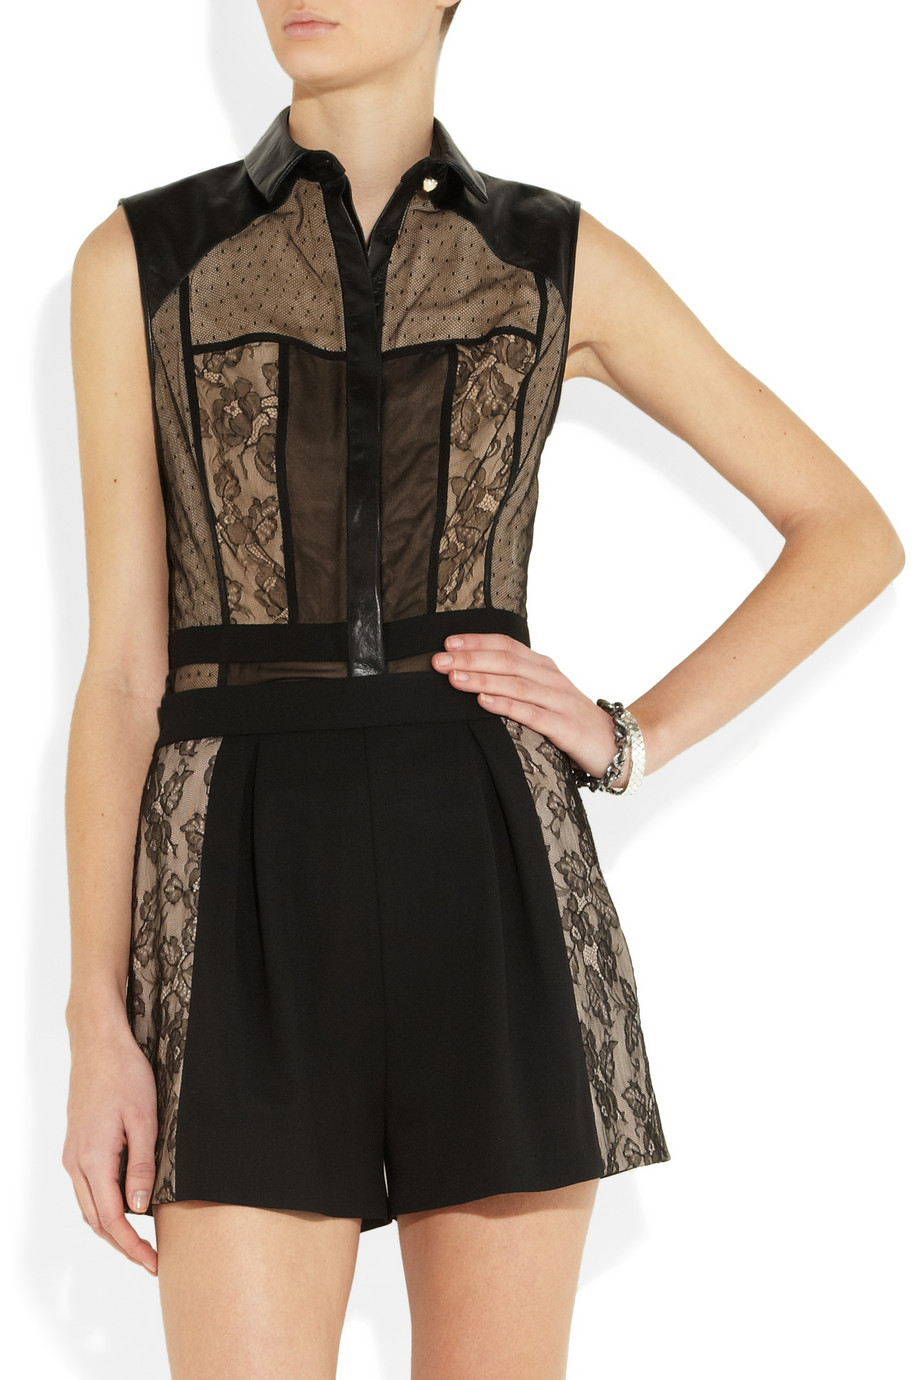 Jason Wu Leathertrimmed Lace and Tulle Top in Black - Lyst